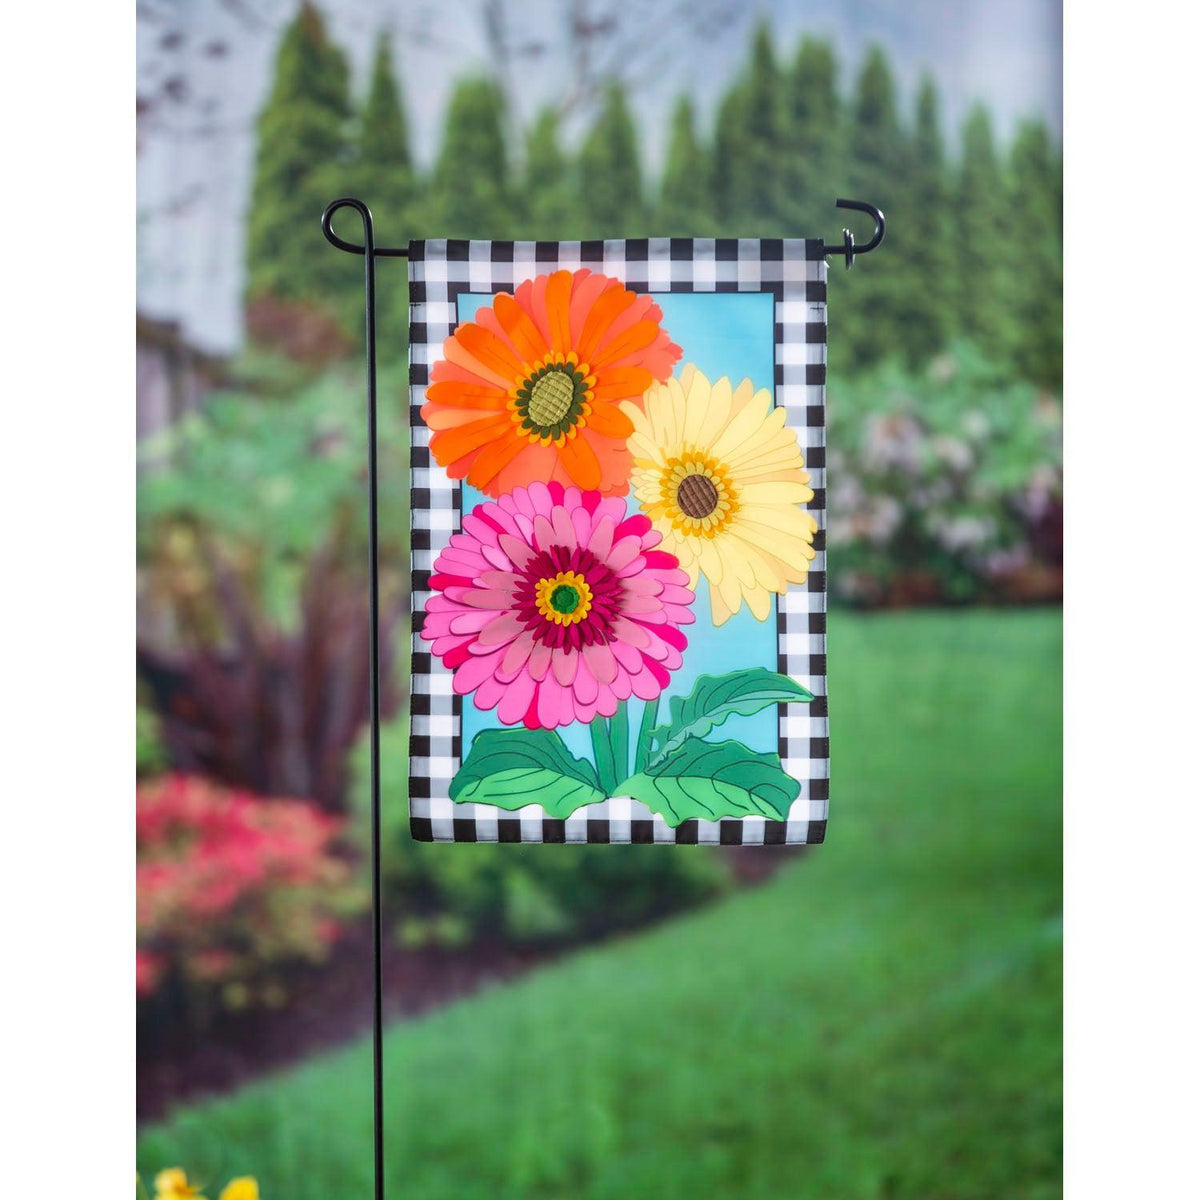 The Gerbera Daisy Trio garden flag features an orange, a yellow, and a pink Gerbera Daisy surrounded by a black and white checked border.